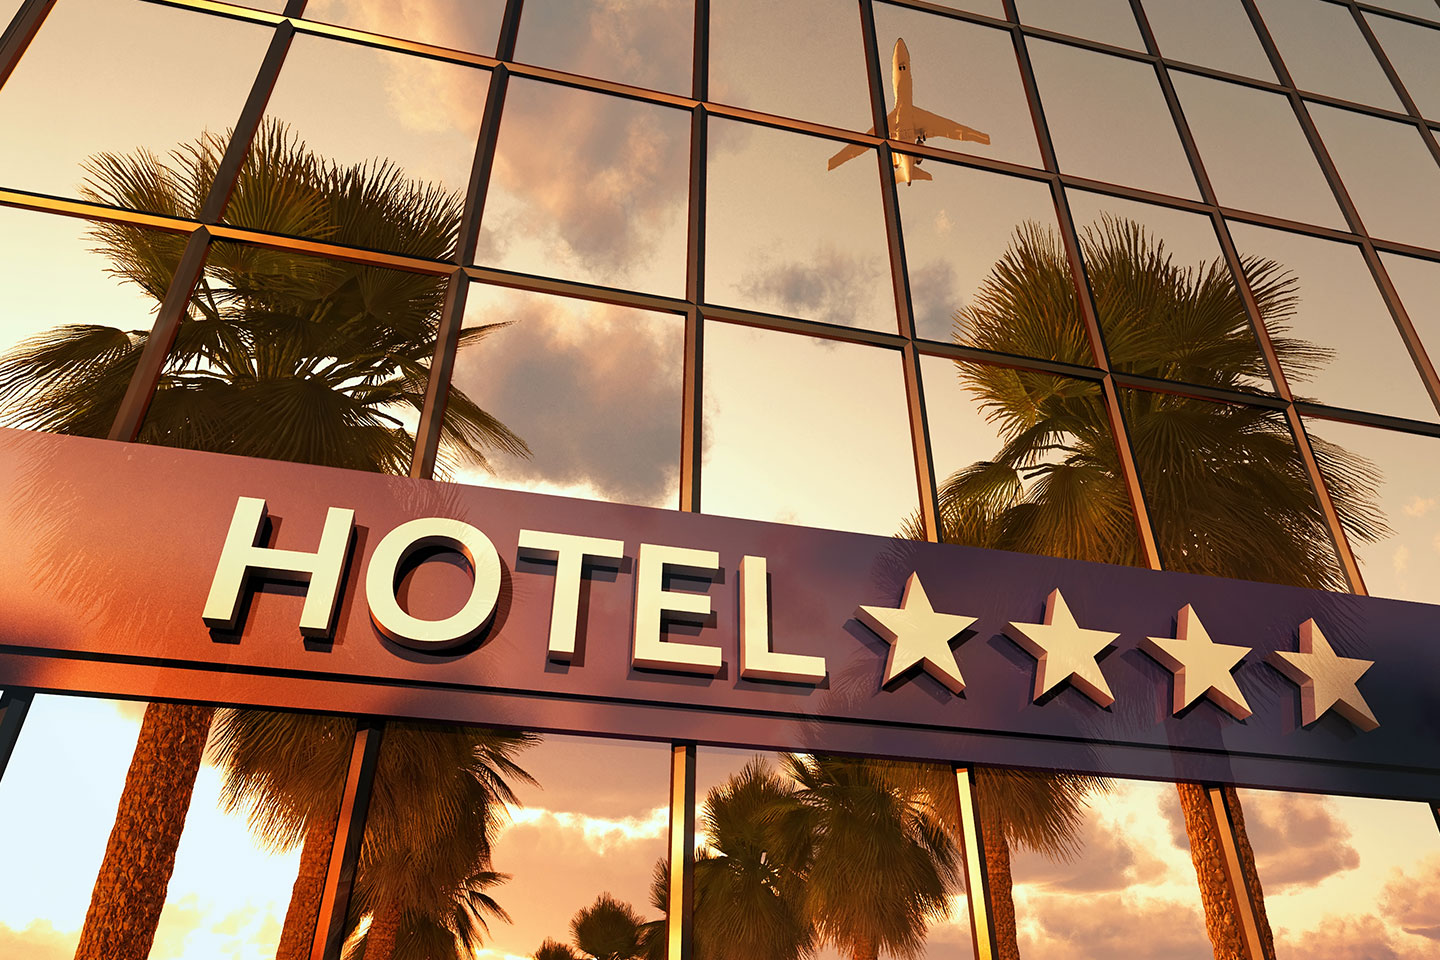 Making the grade: Hotel star ratings